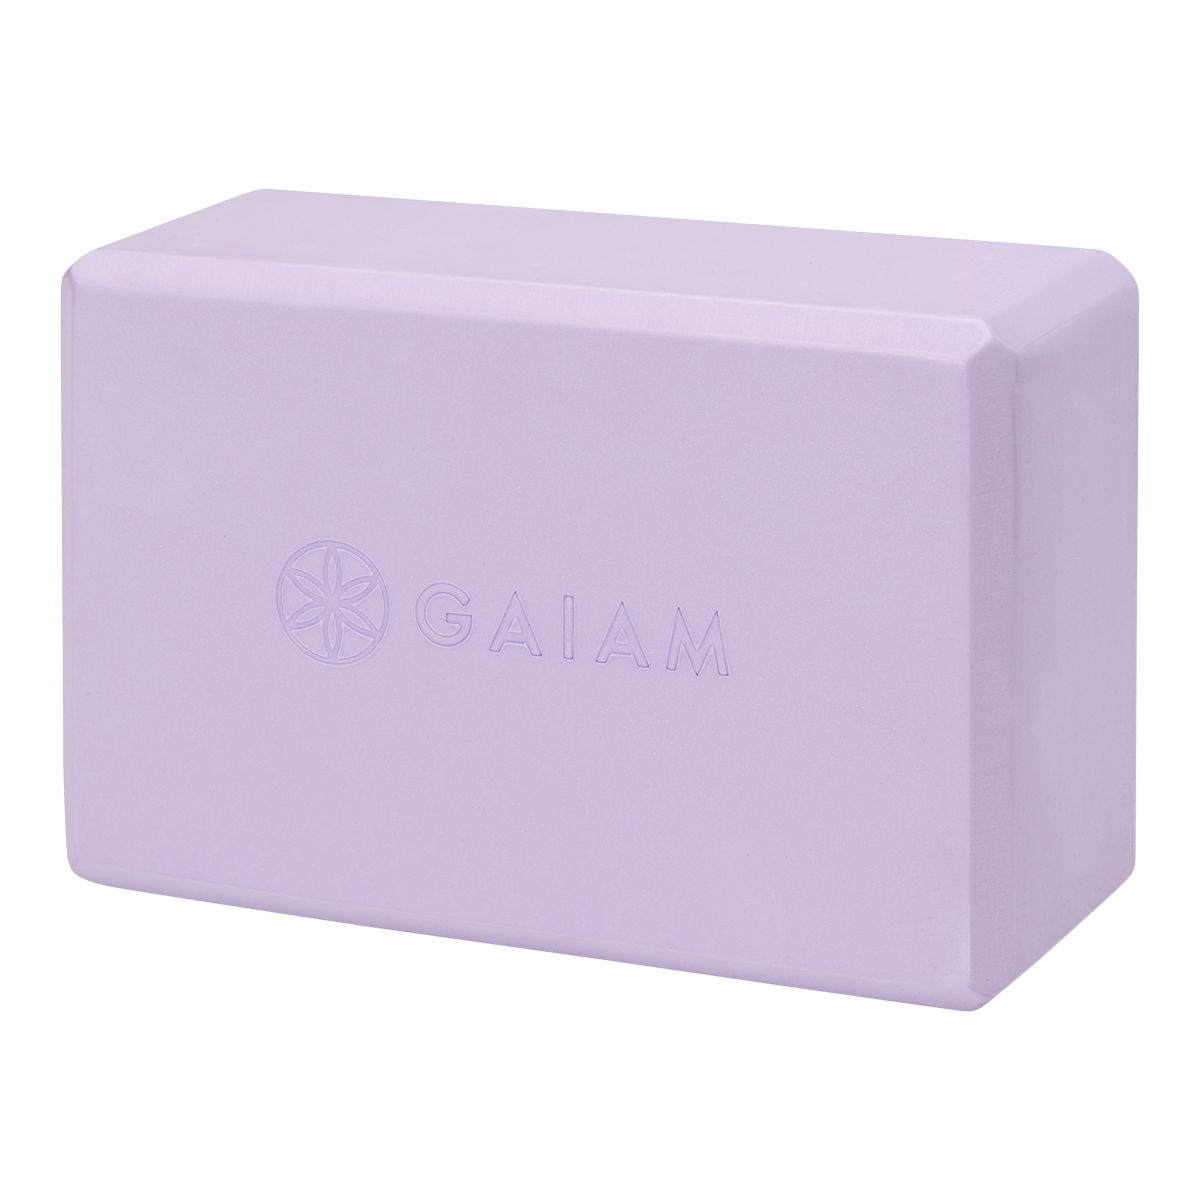 Gaiam Yoga Block 2-Pack (2 stores) see the best price »